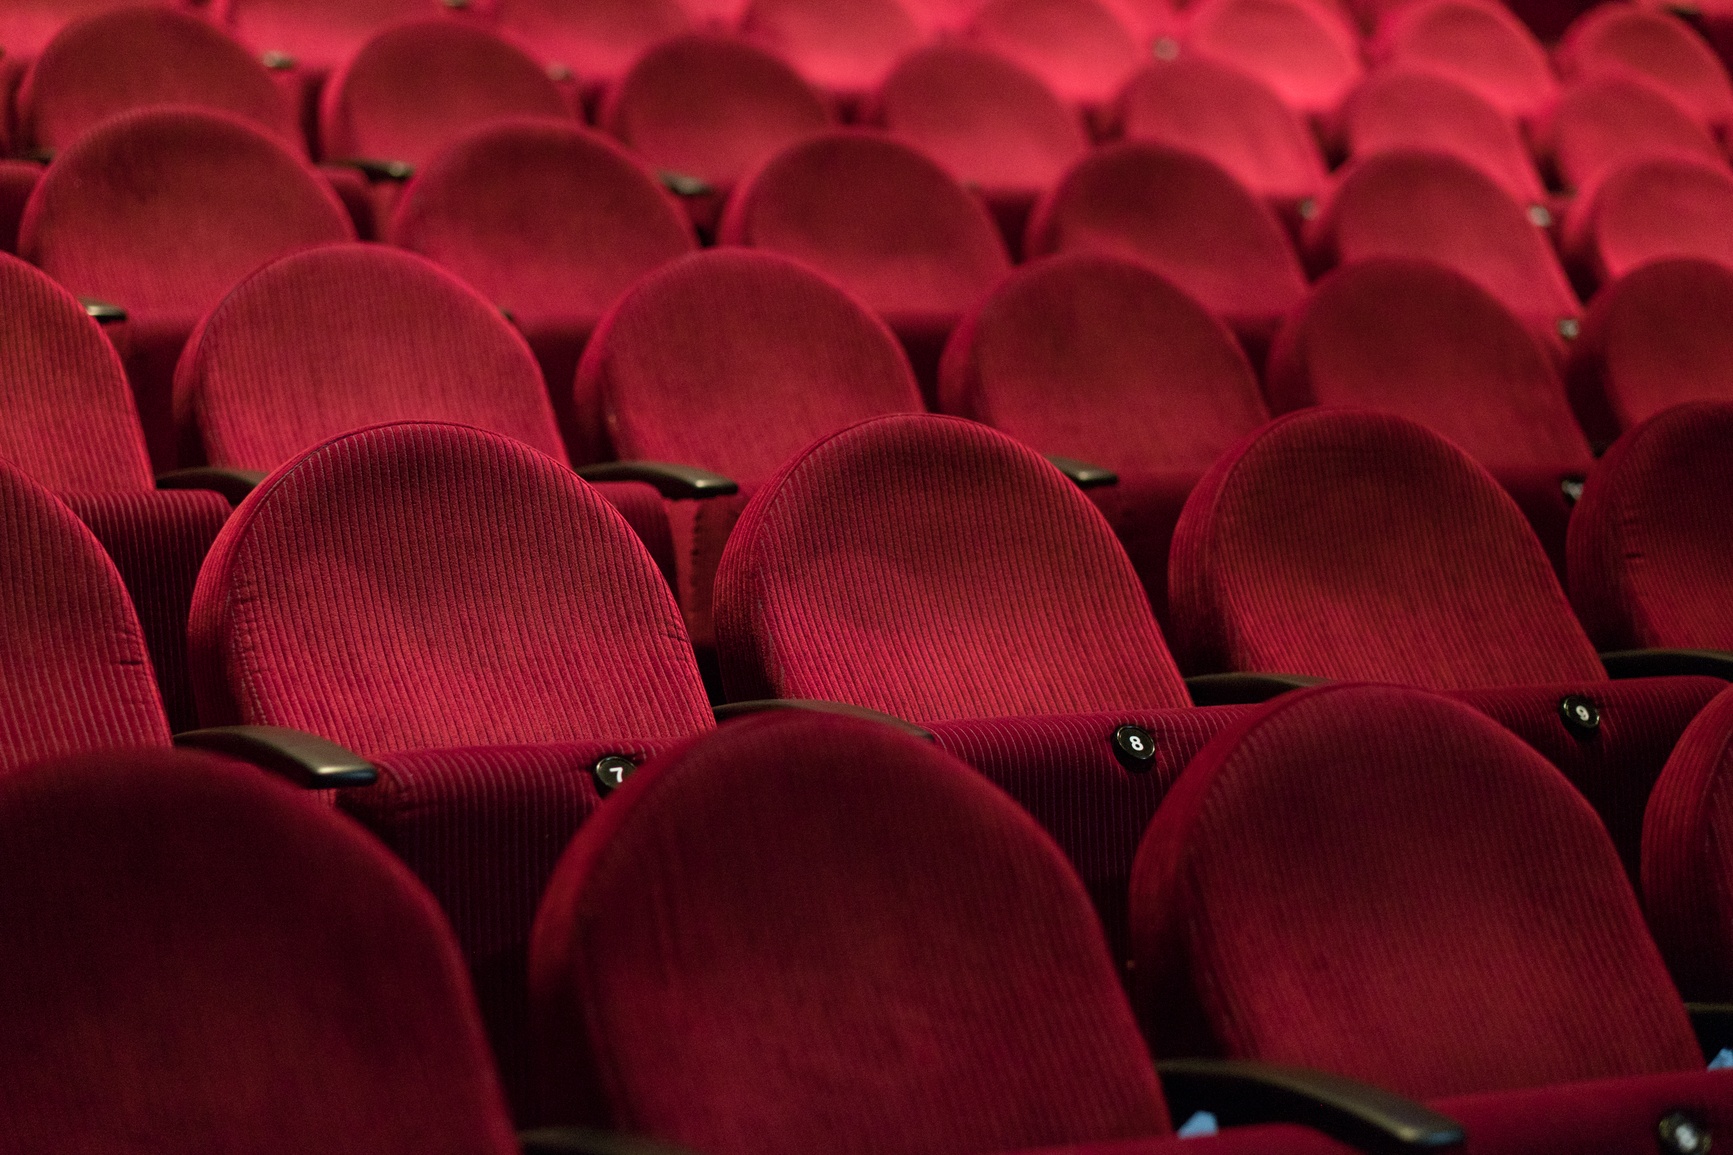 Increase Your Award Show Attendance With These 3 Deadline Pricing Tips